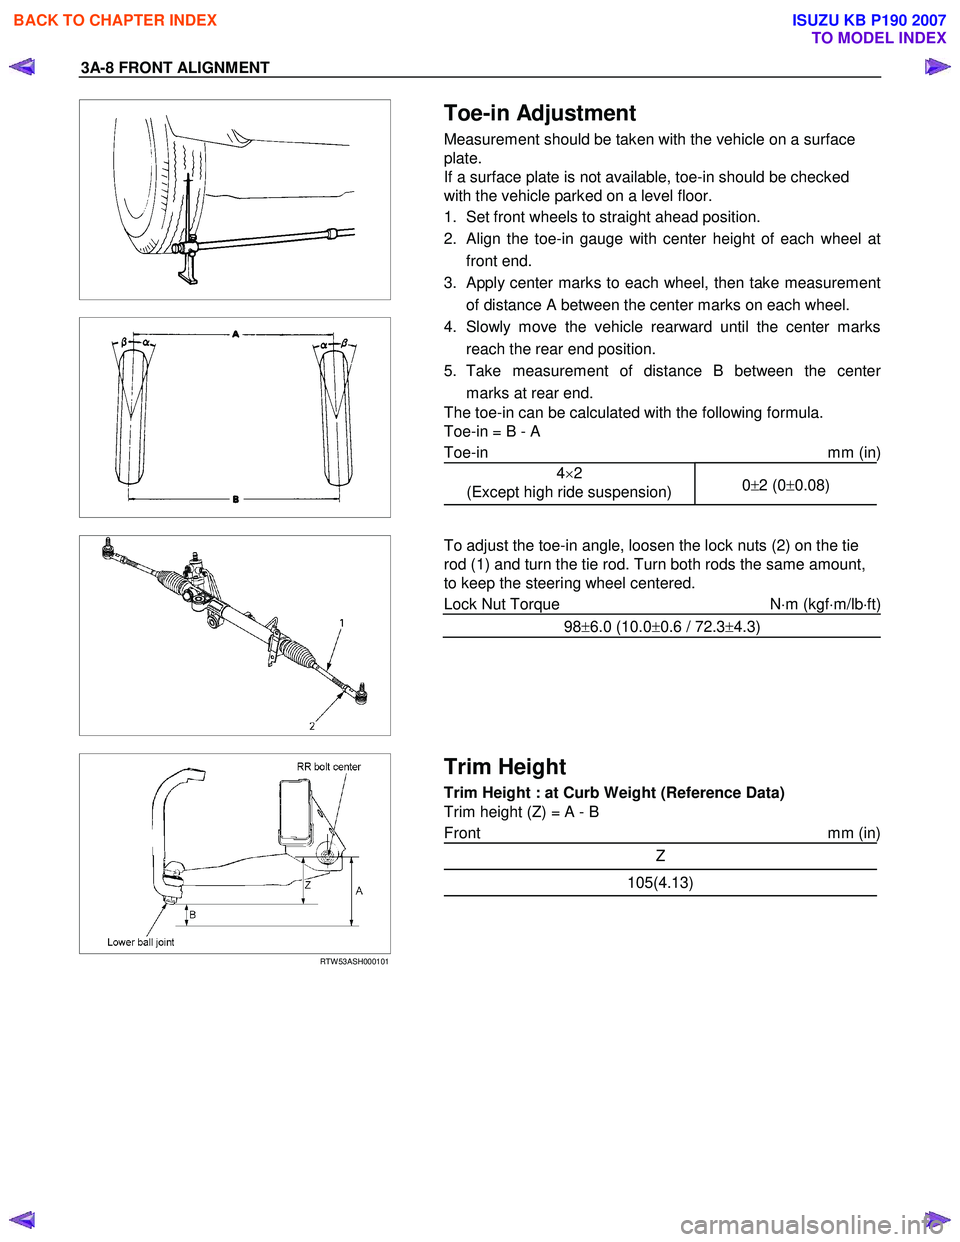 ISUZU KB P190 2007  Workshop Repair Manual 3A-8 FRONT ALIGNMENT 
 
  
 
  
 Toe-in Adjustment 
Measurement should be taken with the vehicle on a surface  
plate. 
If a surface plate is not available, toe-in should be checked 
with the vehicle 